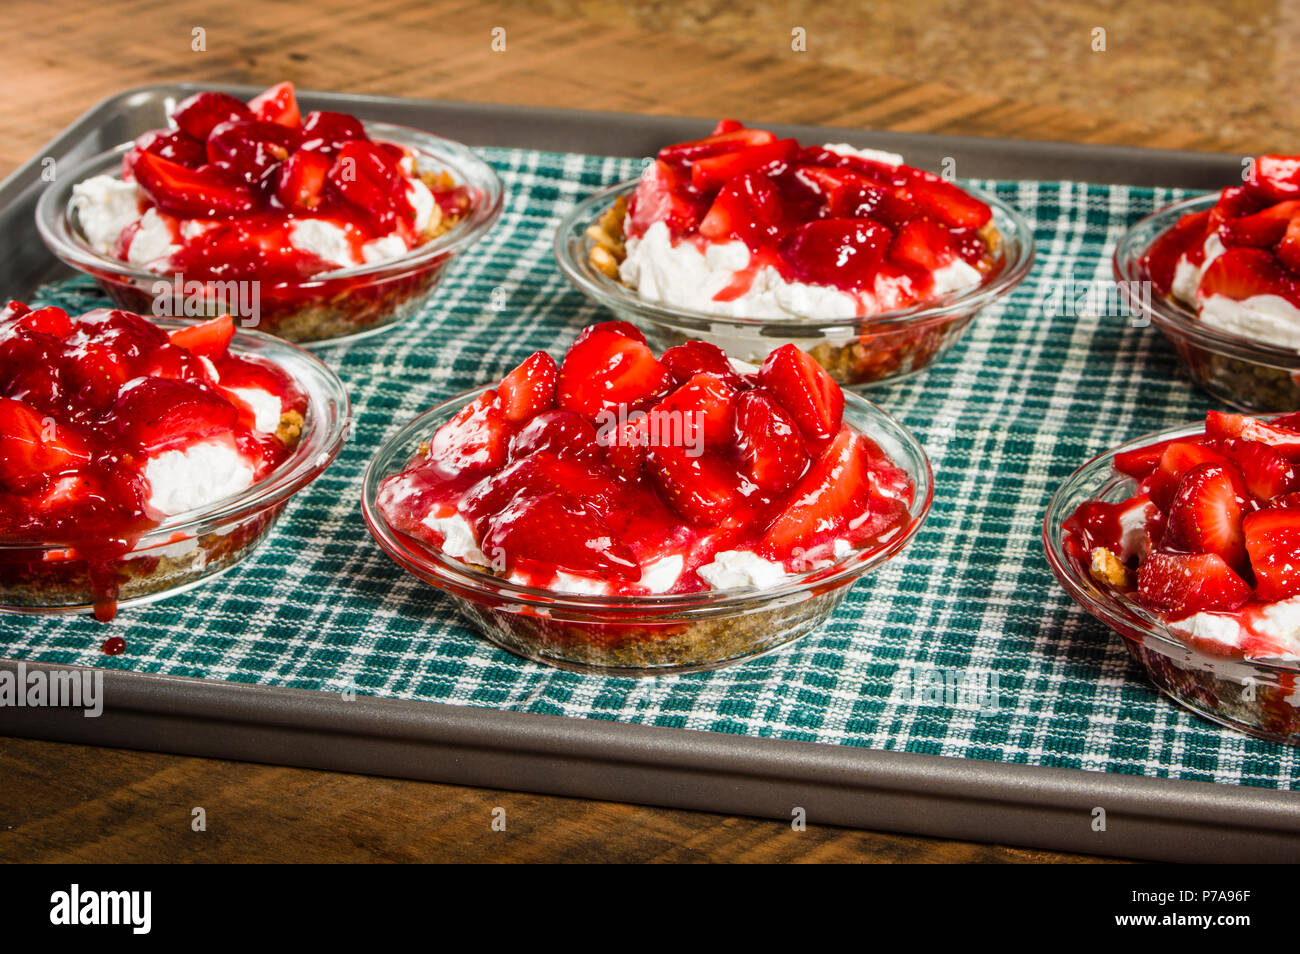 Strawberry pies with whipped cream on a baking sheet Stock Photo